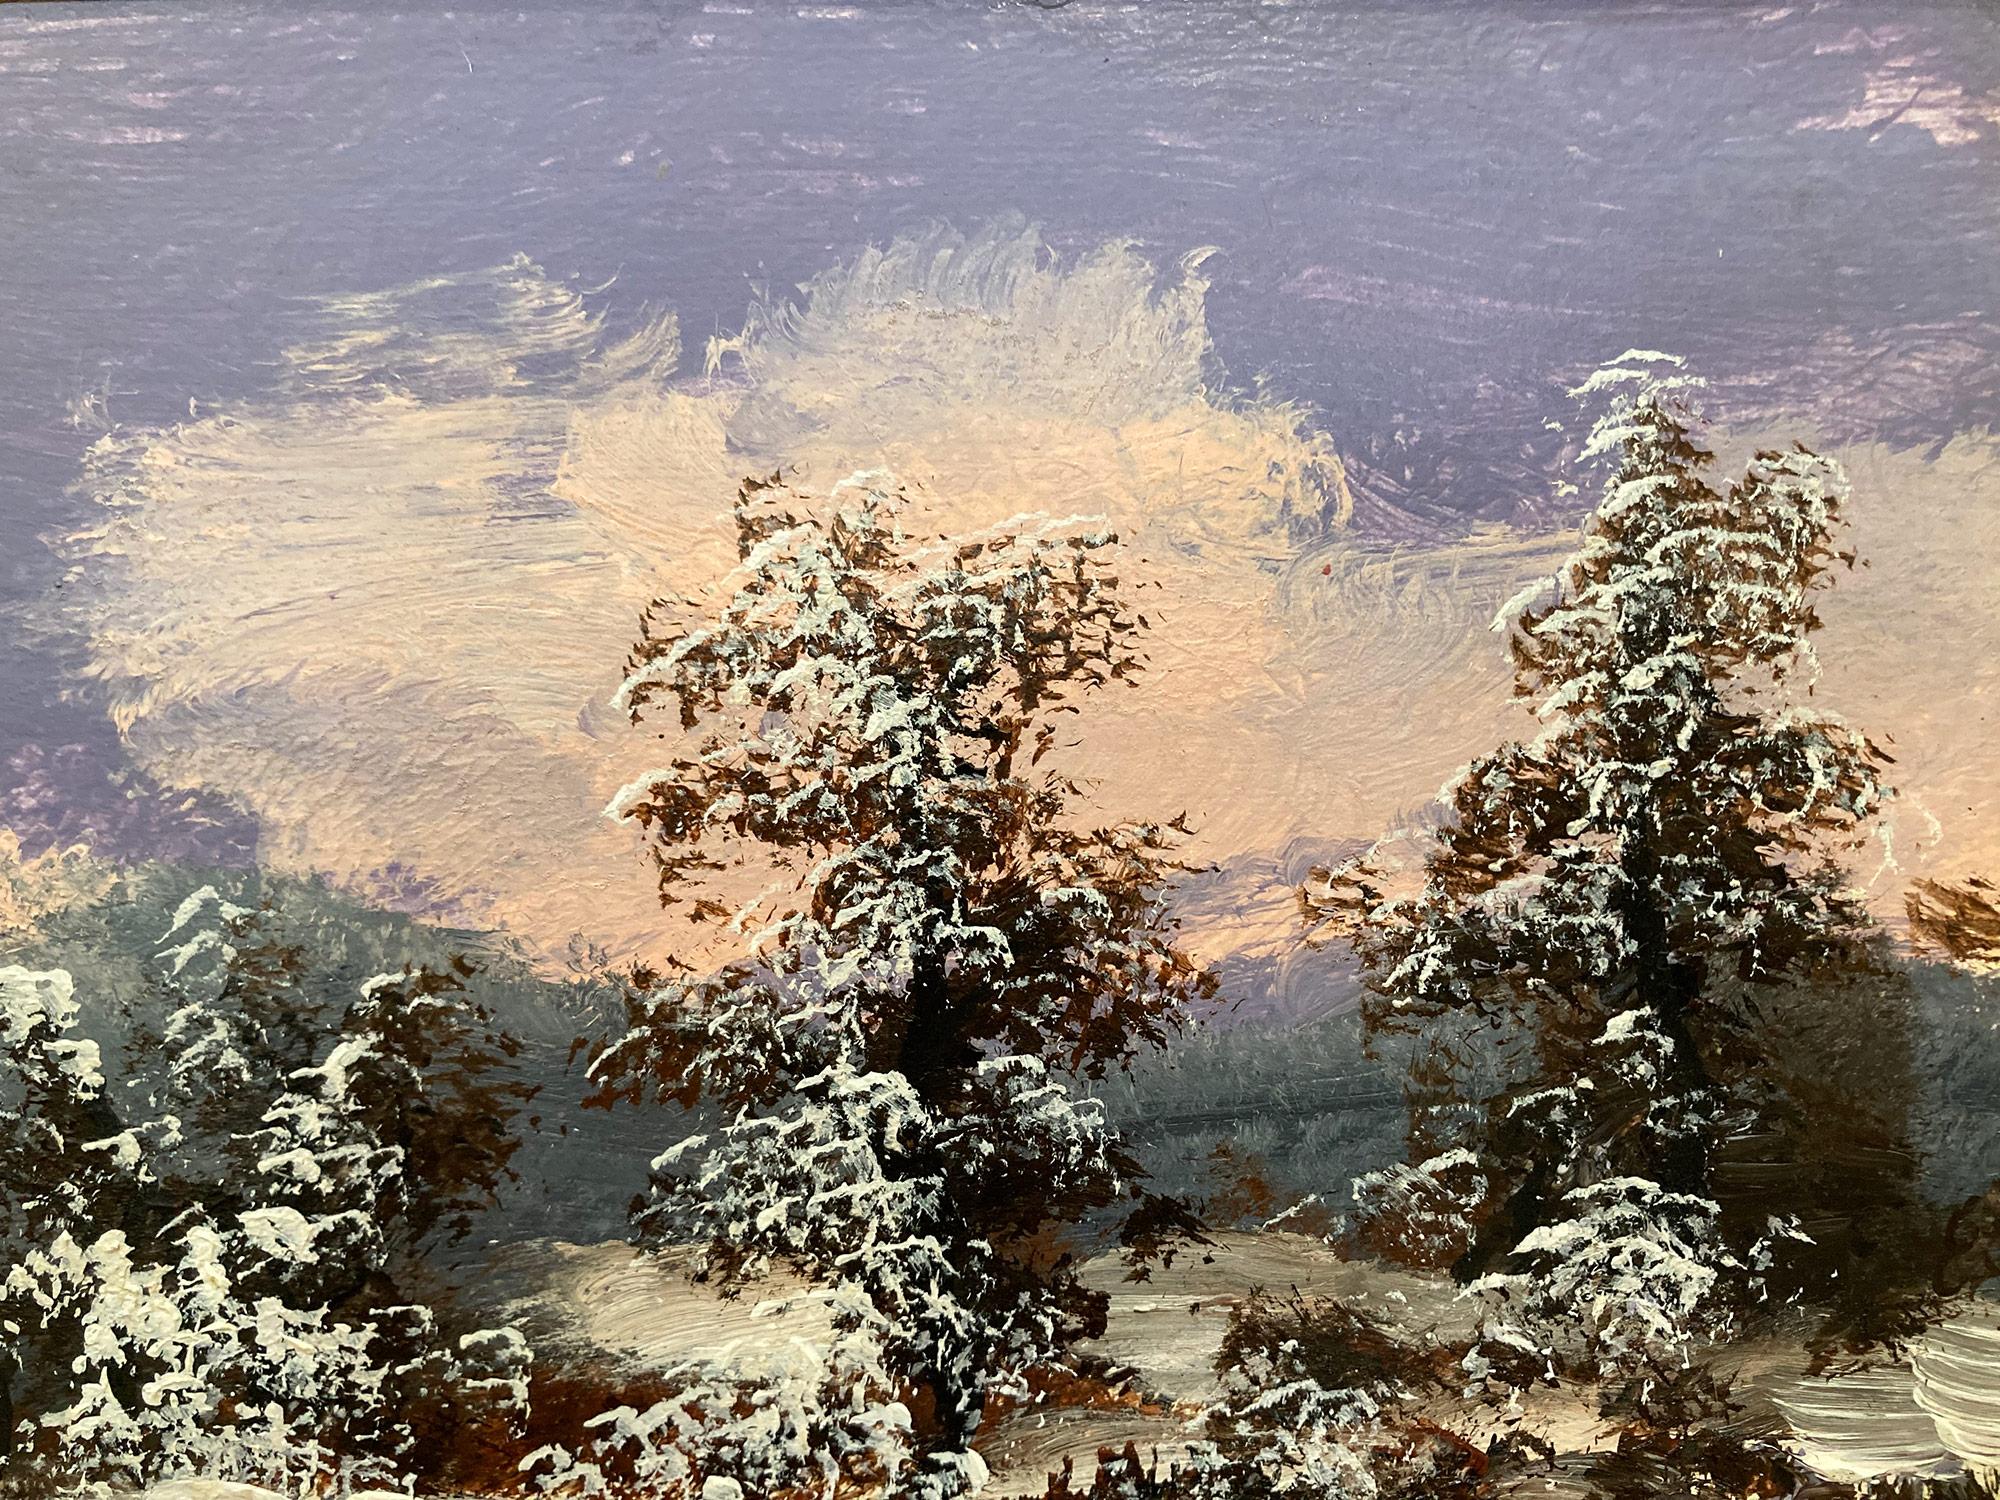 A fine depiction of a Hill Top snow scene in New York in the winter season. For this wonderful depiction, Nemethy uses a fine technique which depicts the landscape and the buildings in a miniature way. With joyful colors, this piece is bright and